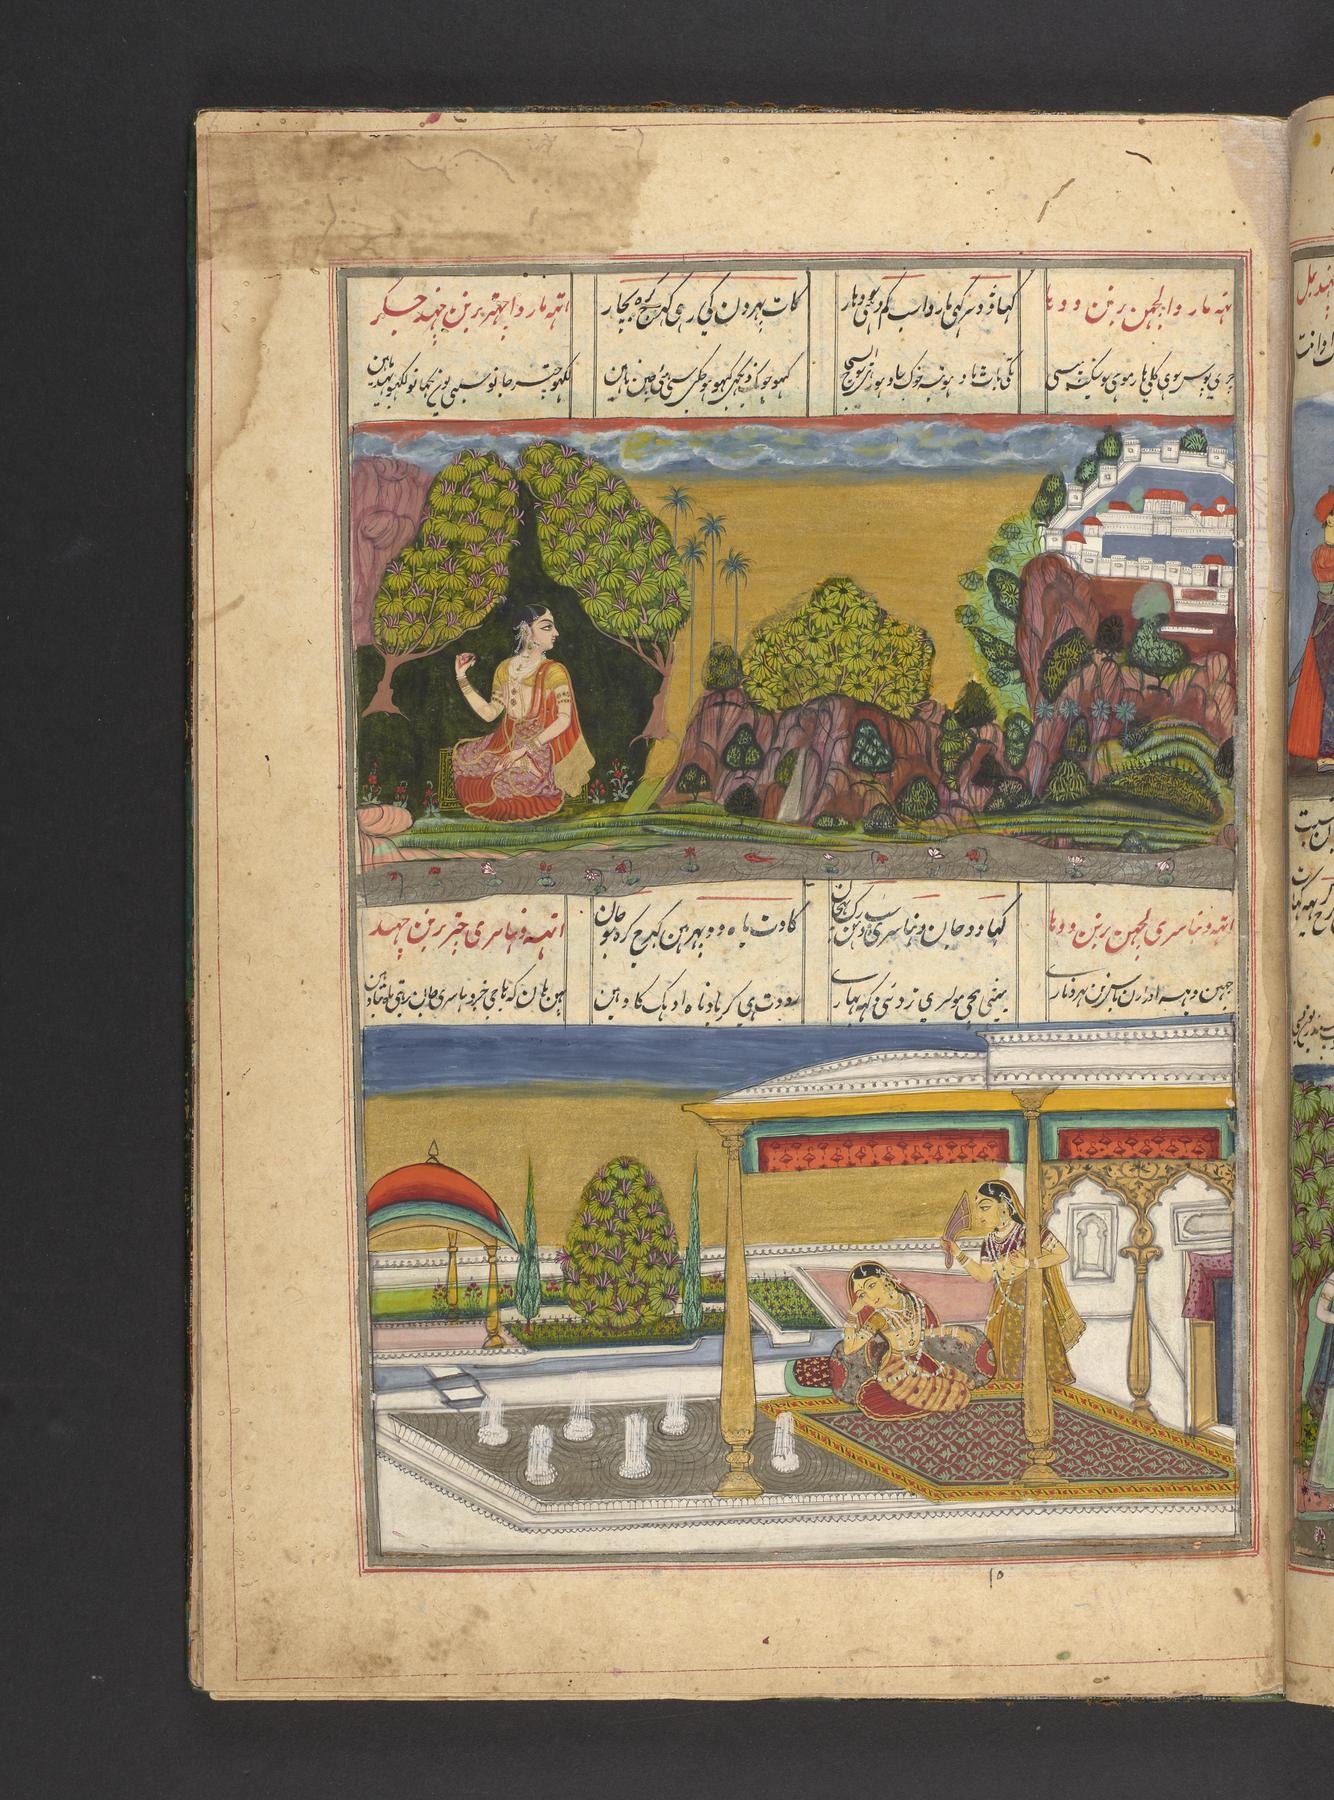 Coffee with a Codex: Indian Music